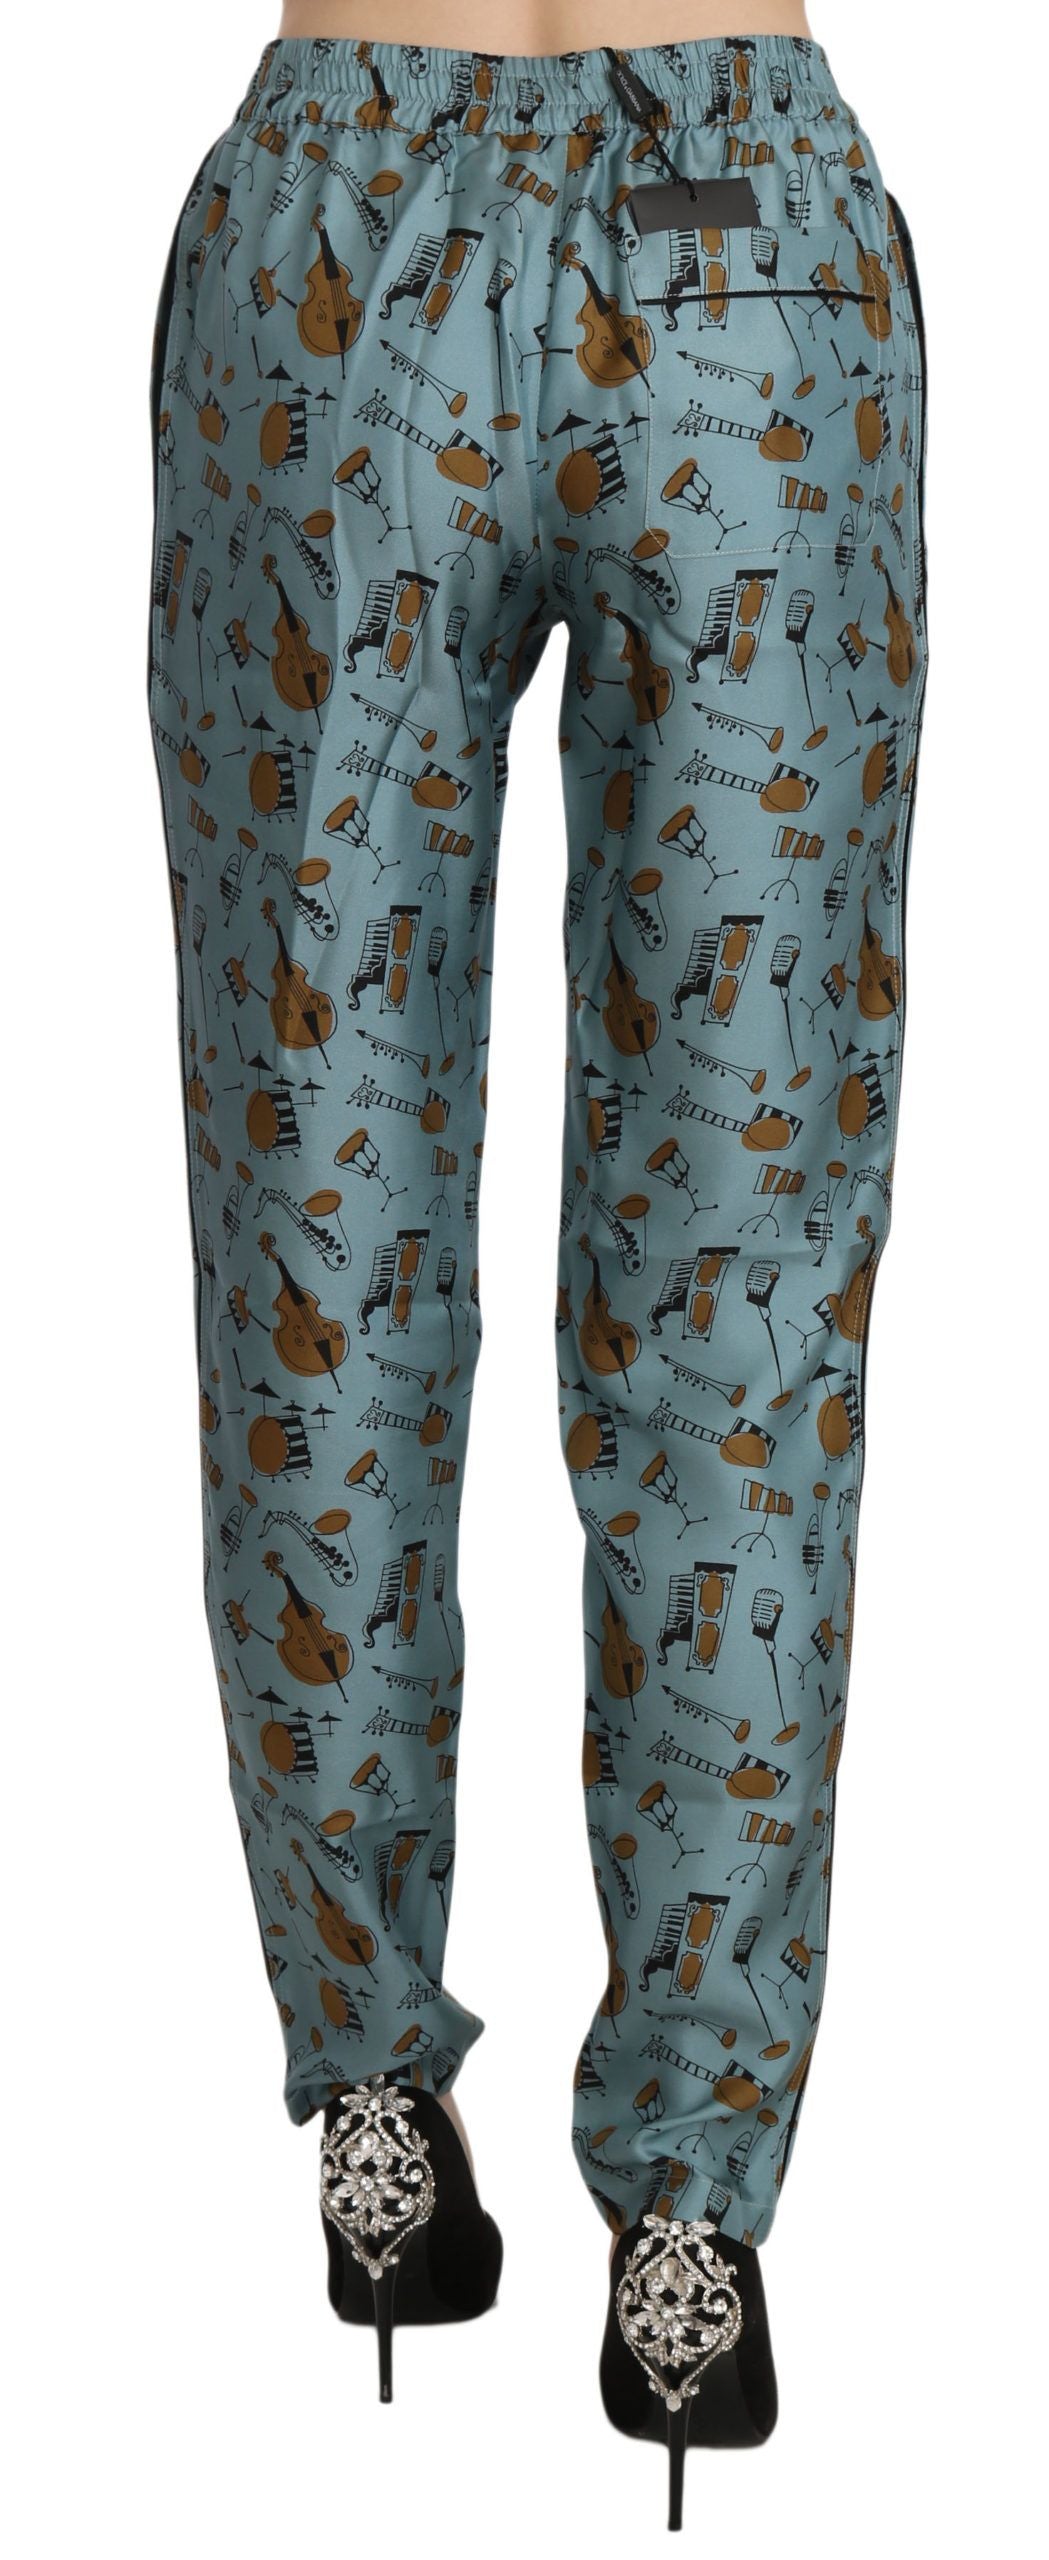 Dolce & Gabbana Blue Musical Instruments Print Tapered Pants